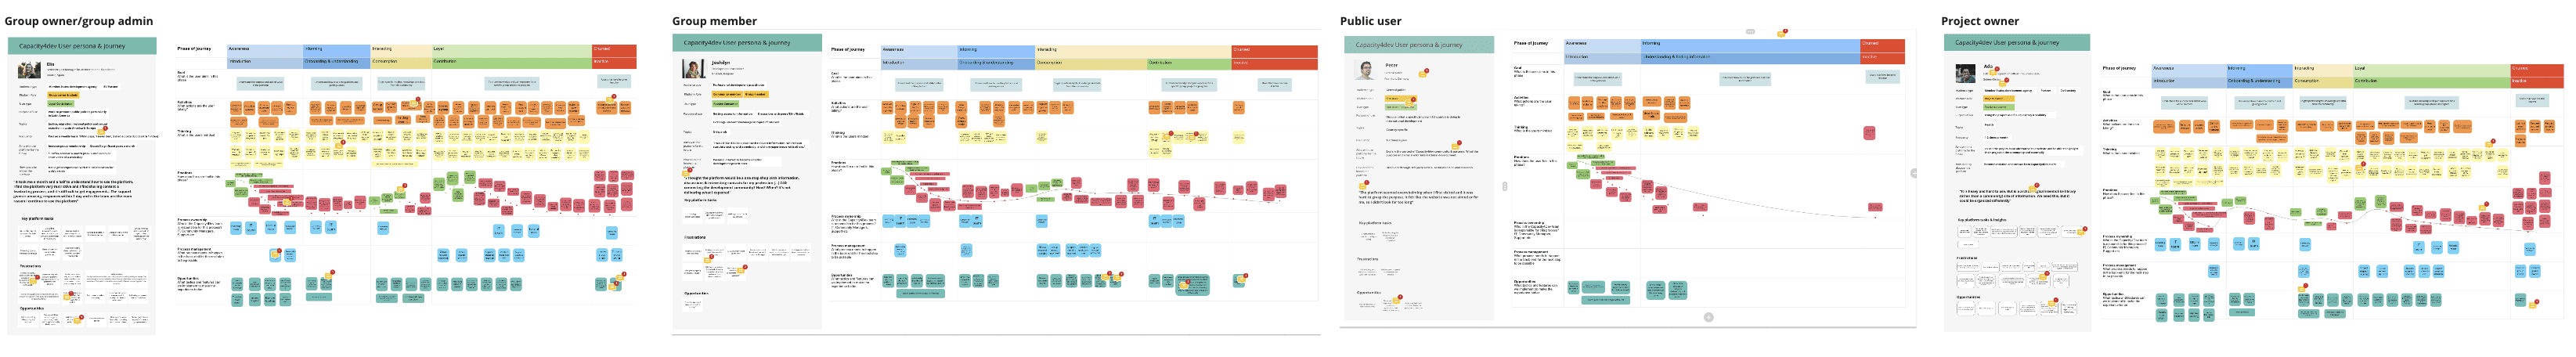 A screenshot of the persona's and Customer Journey Maps we used during our workshop and as a WIP document for further definement.